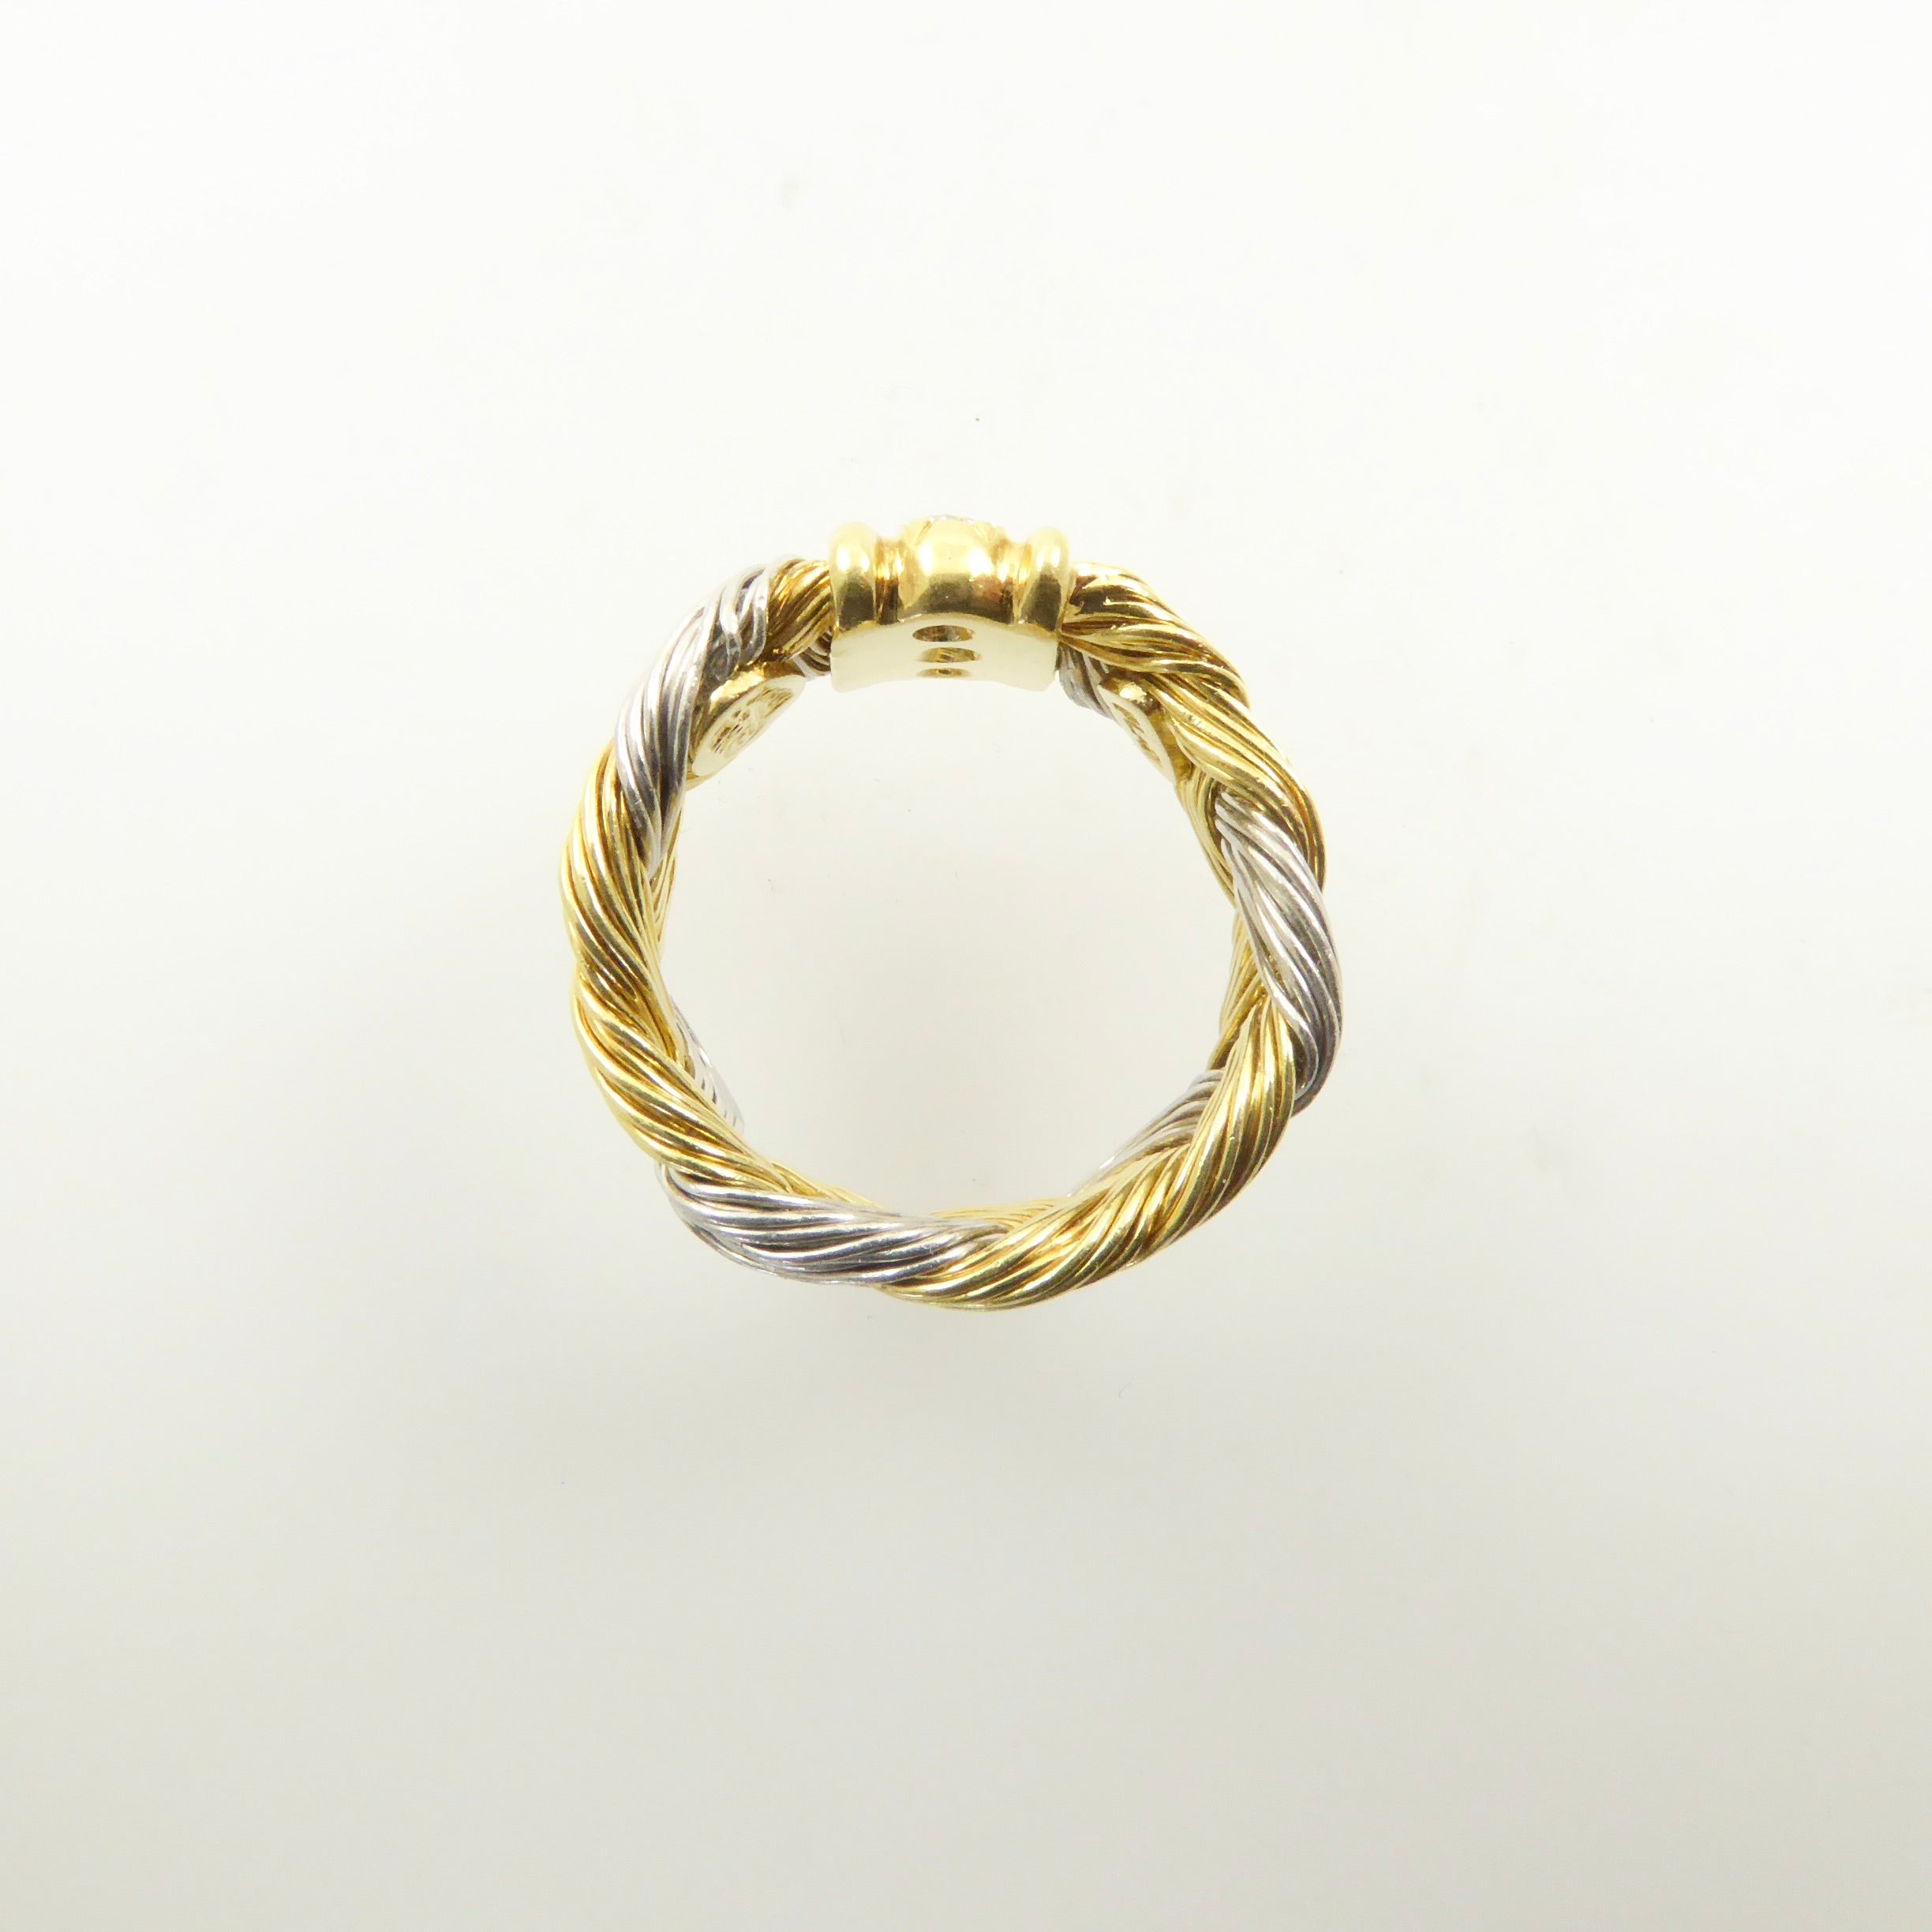 Henry Dunay Gold and Platinum Braided Ring with Diamonds